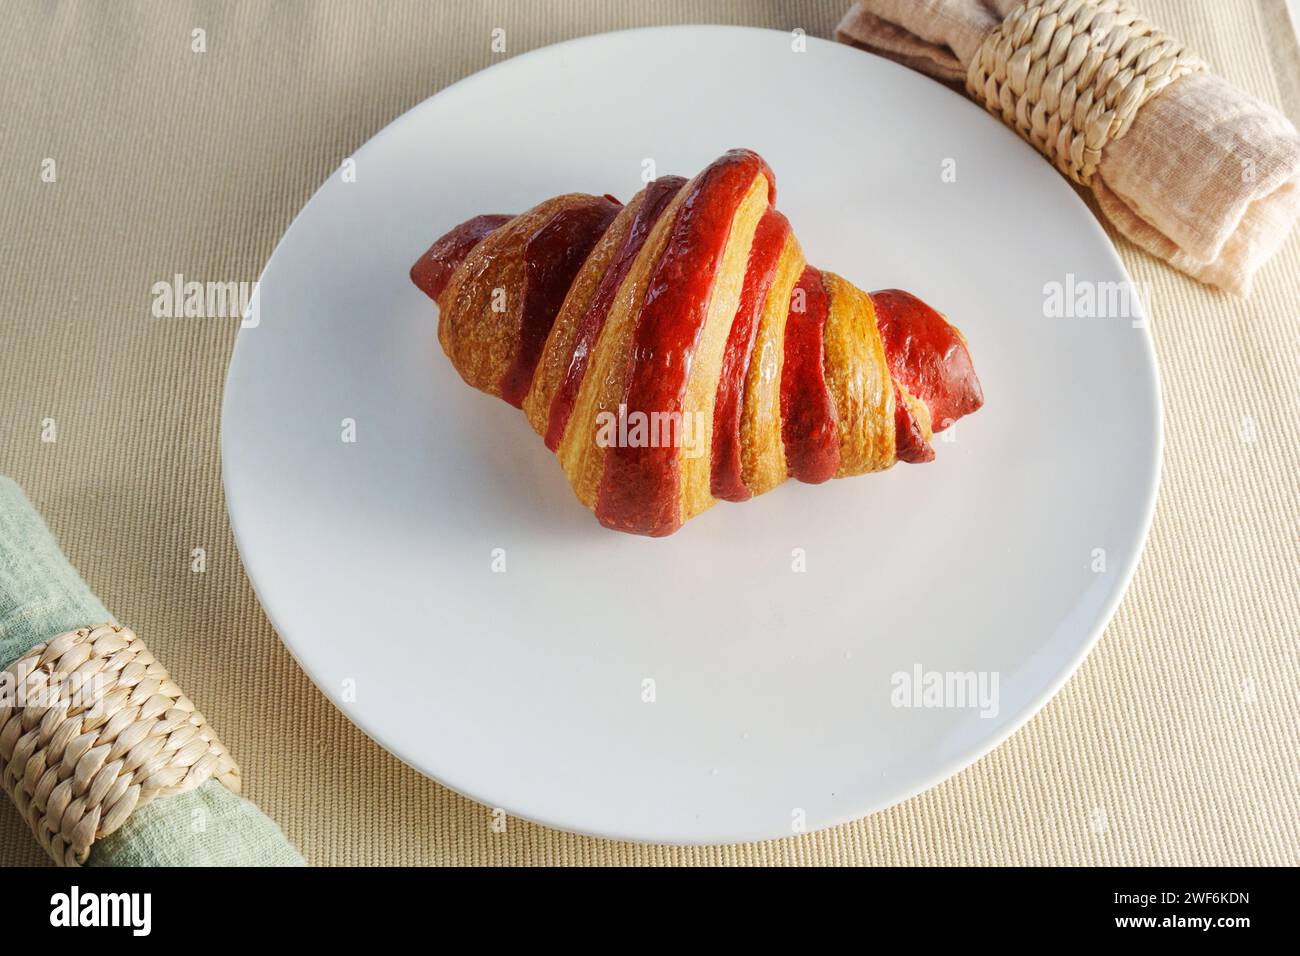 Croissant vibrant piece of fruit, a succulent crimson strawberry, creating an ethereal and evocative composition. Stock Photo